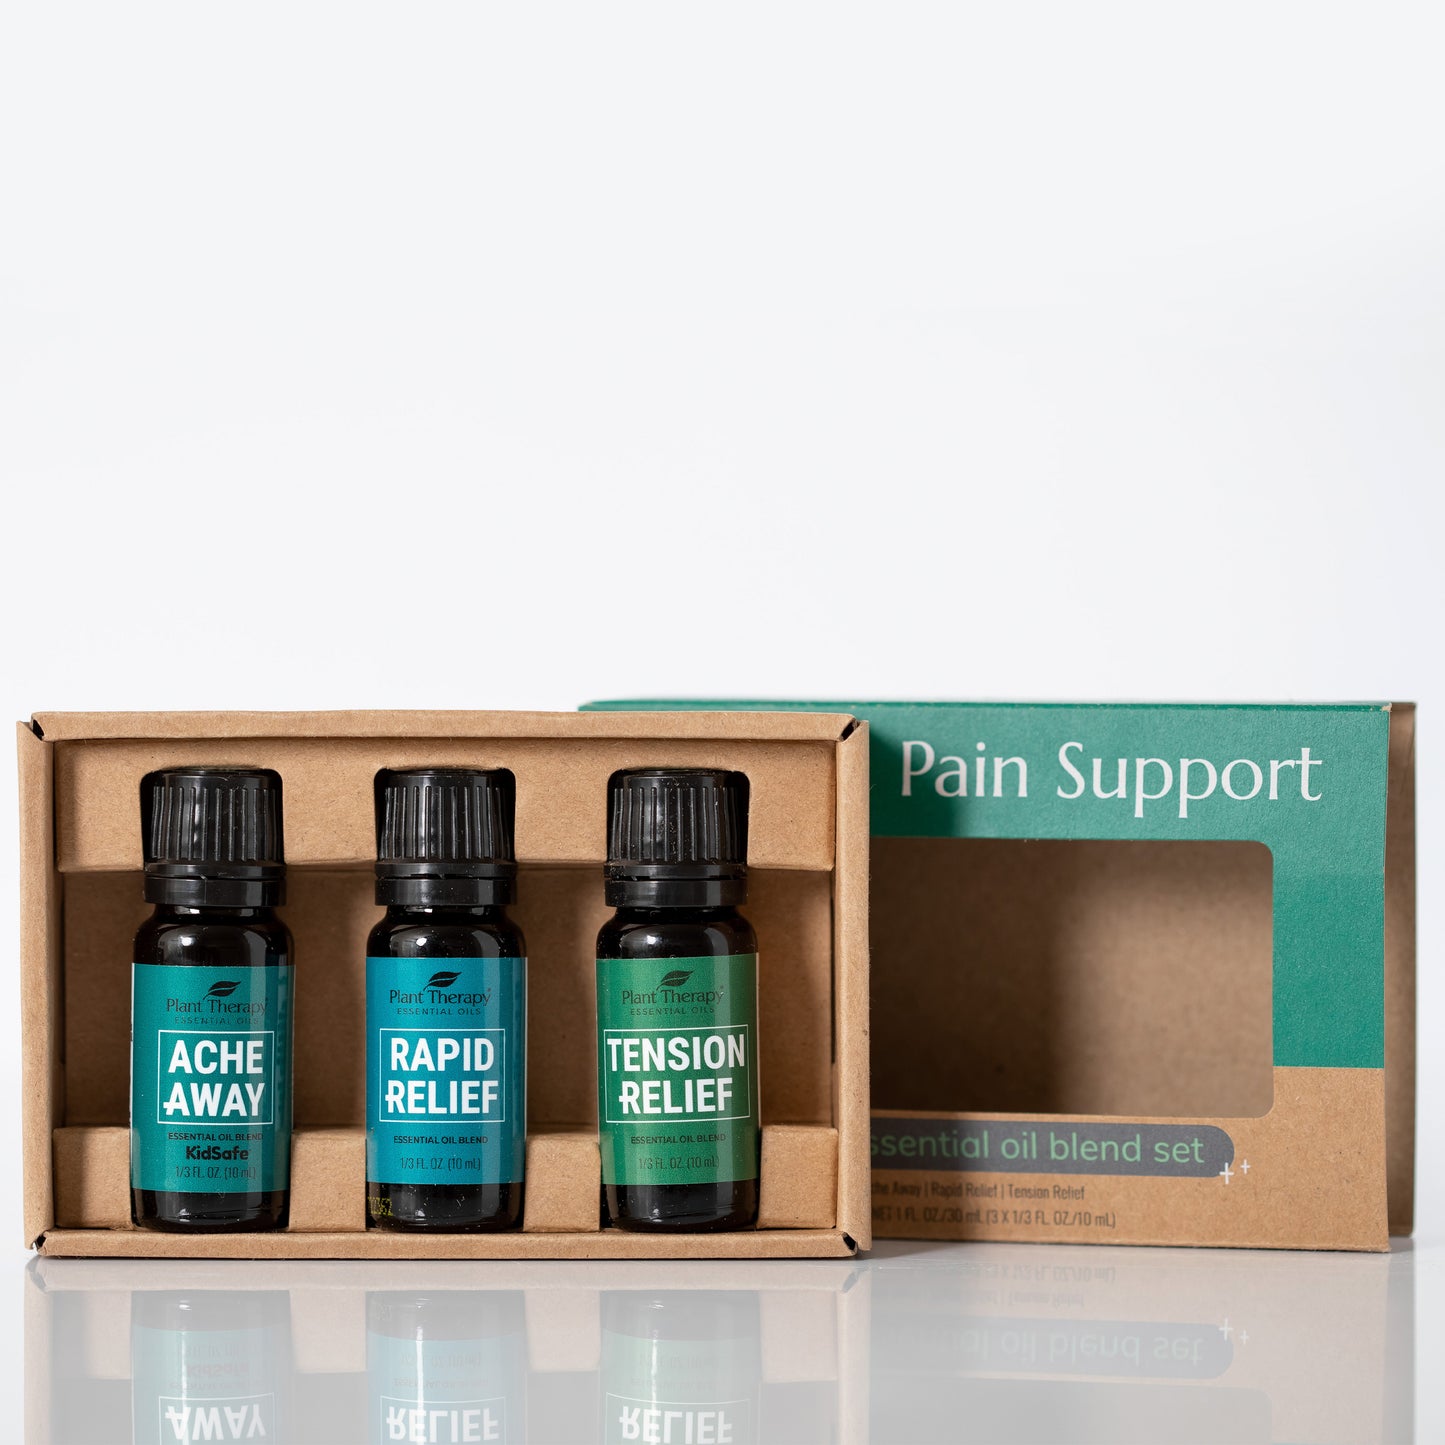 Pain Support Essential Oil Blend Set